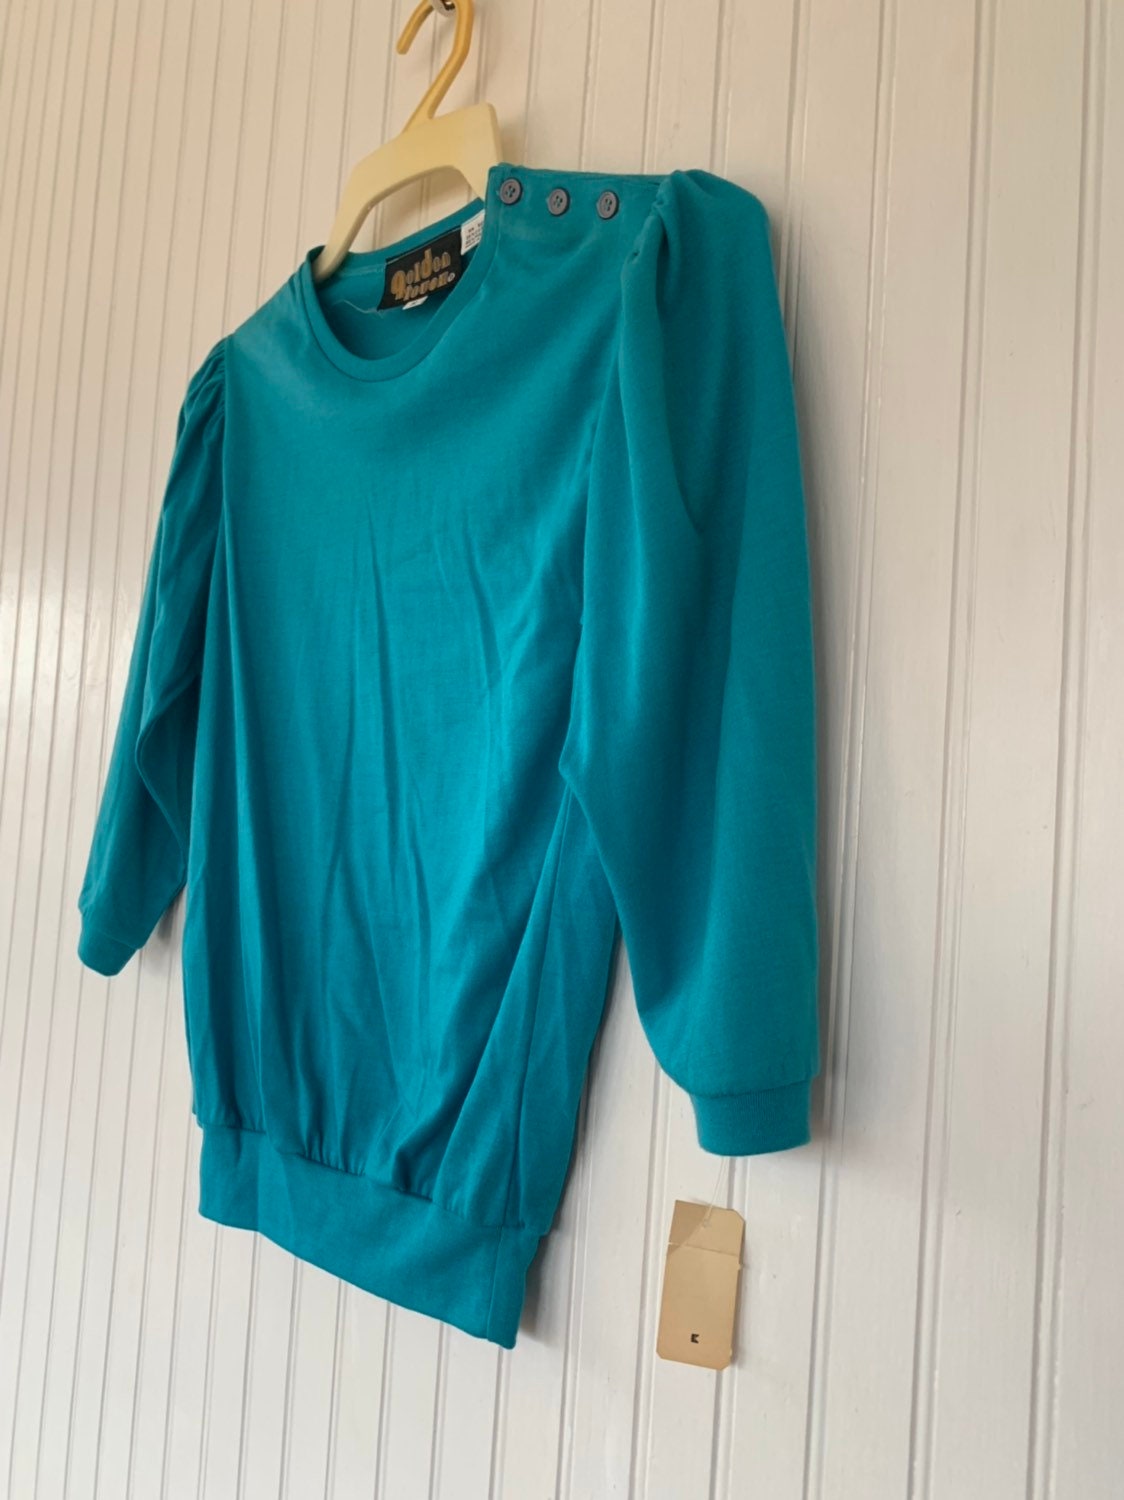 Unique Vintage 70s 80s Bright Turquoise Blue Puff Sleeve Top Shirt ...